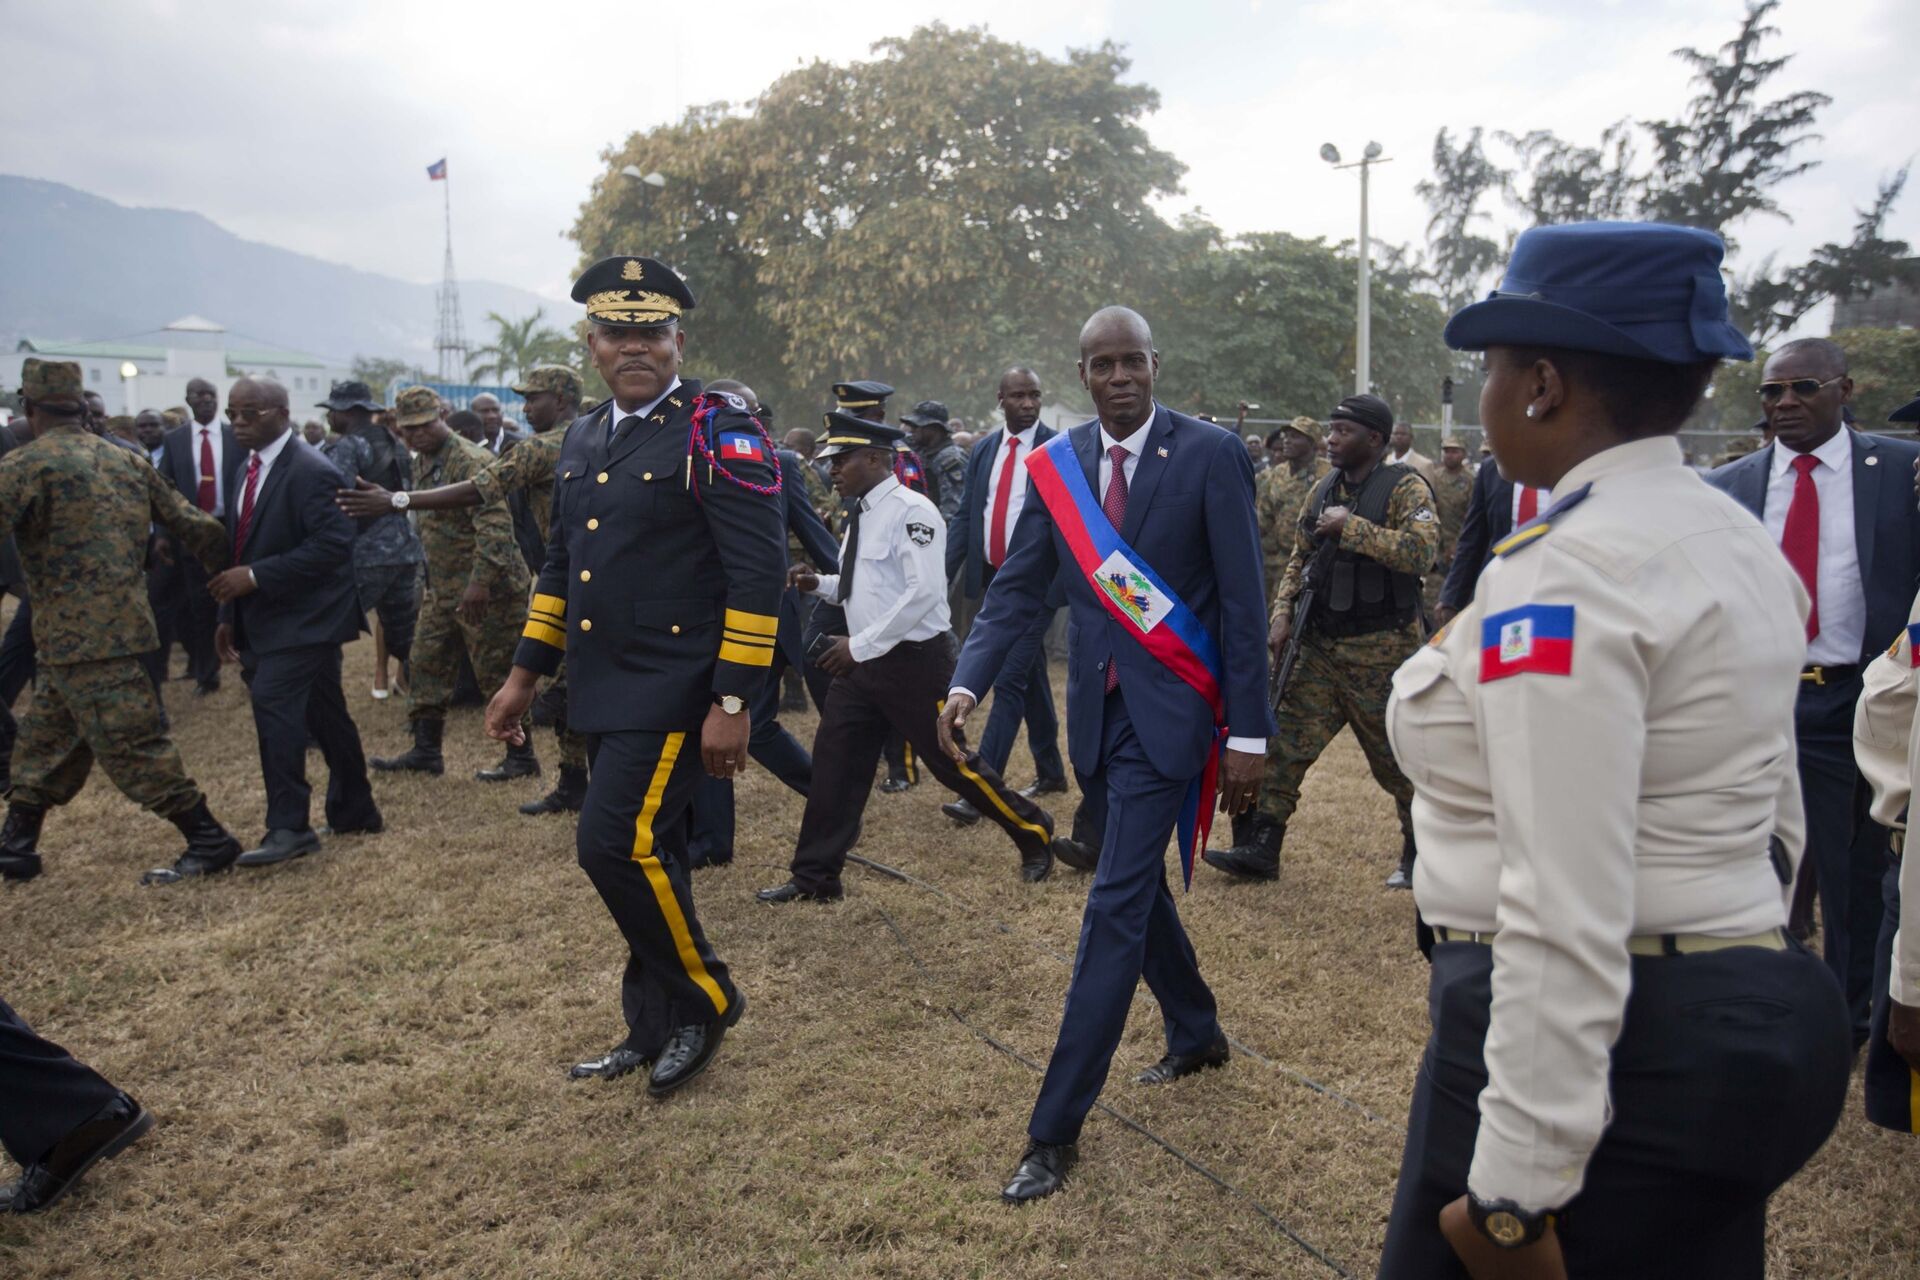 FILE - In this Feb. 7, 2017 file photo, newly sworn-in Haitian President Jovenel Moise walks with Police Chief Michel-Ange Gedeon past National Police at the National Palace after his inauguration ceremony at Parliament in Port-au-Prince, Haiti.  - Sputnik International, 1920, 07.09.2021